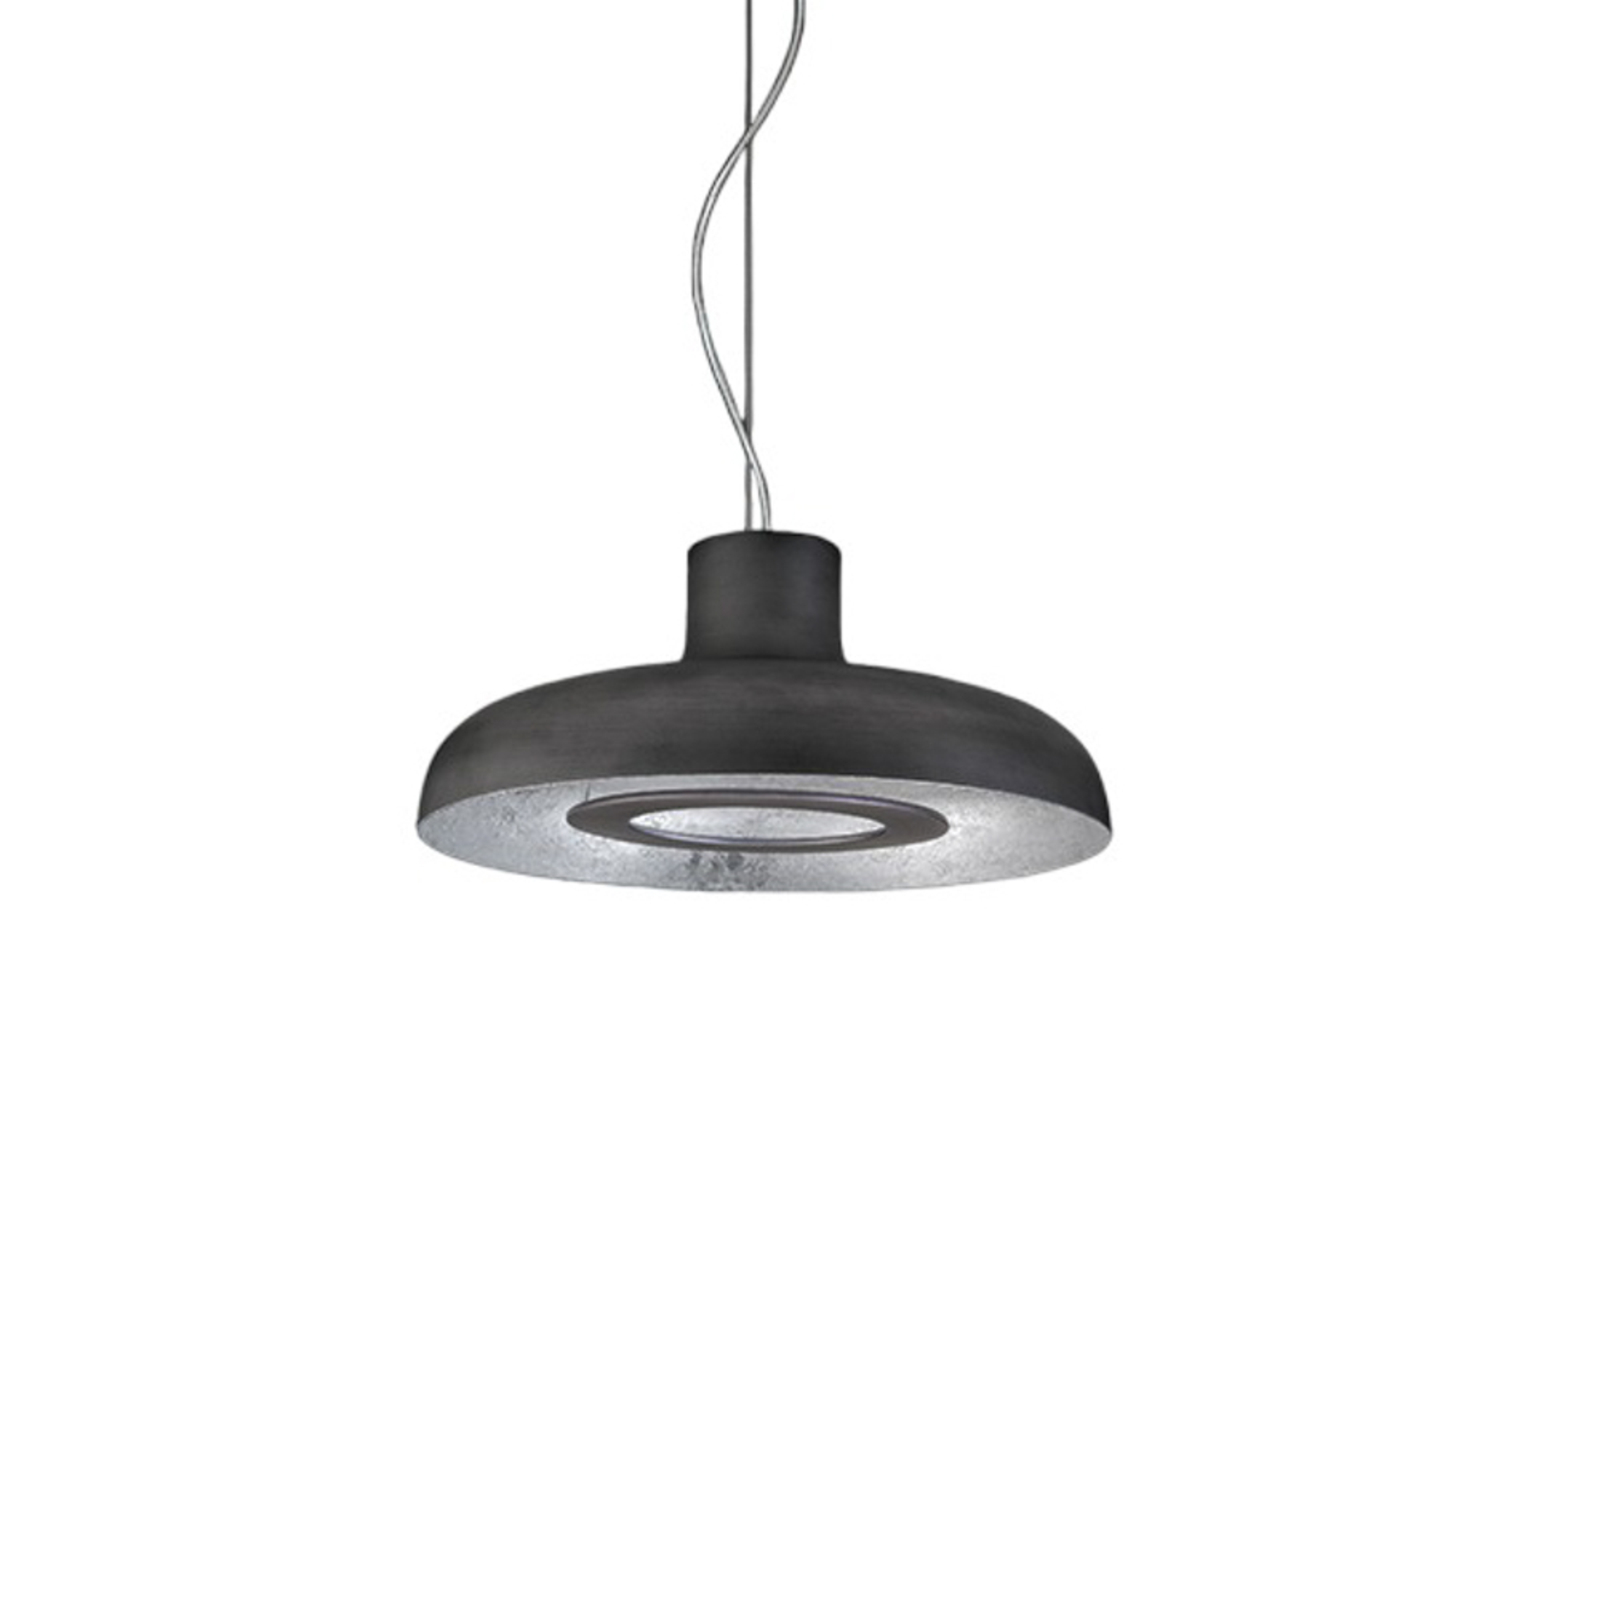 ICONE Duetto LED hanglamp 927 Ø55cm ijzer/zilver